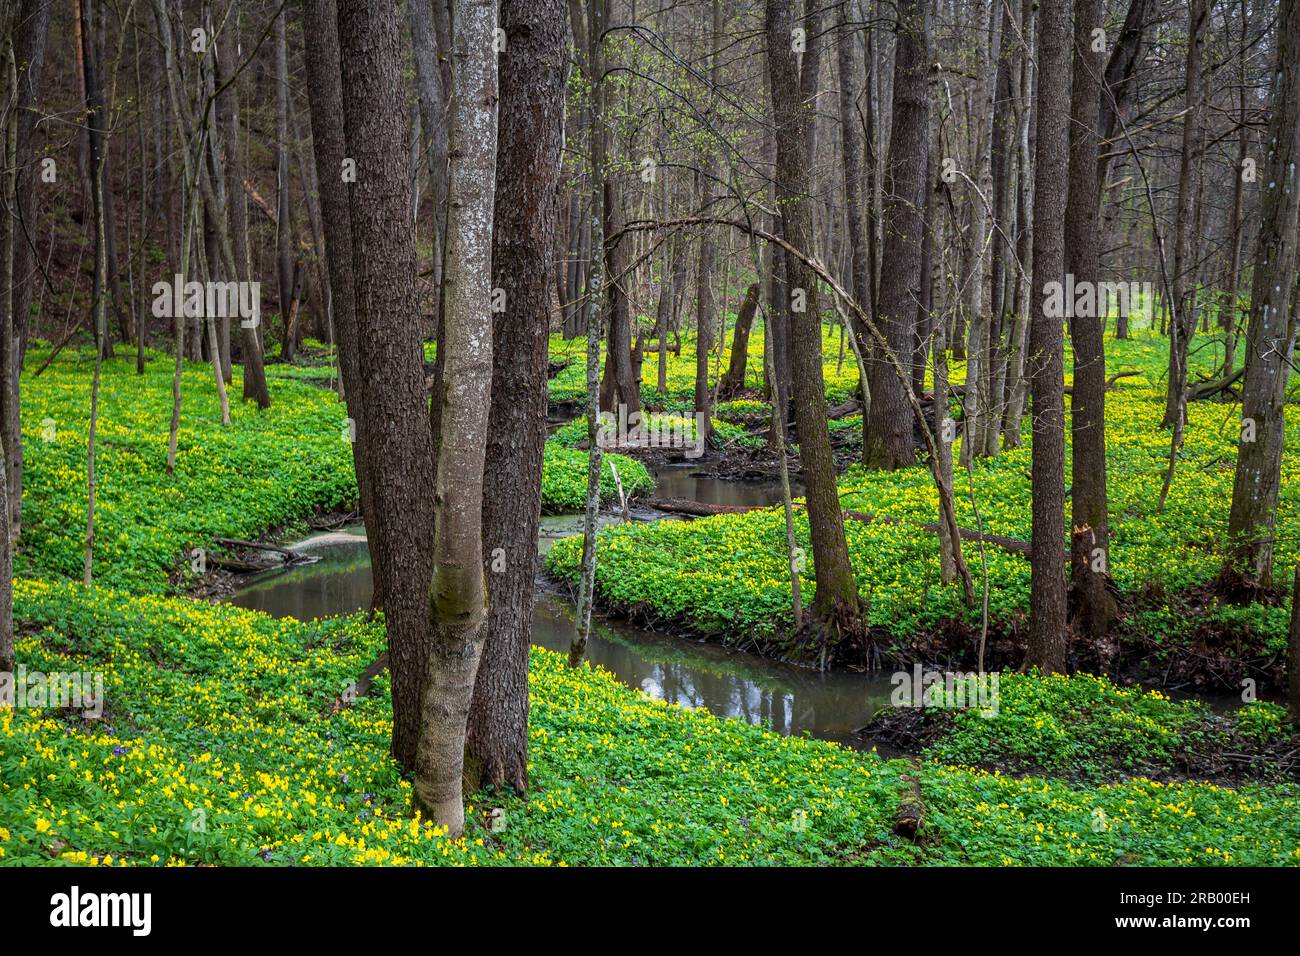 The banks of a forest stream covered with yellow flowers of an yellow anemone Anemonoides ranunculoides plant Stock Photo